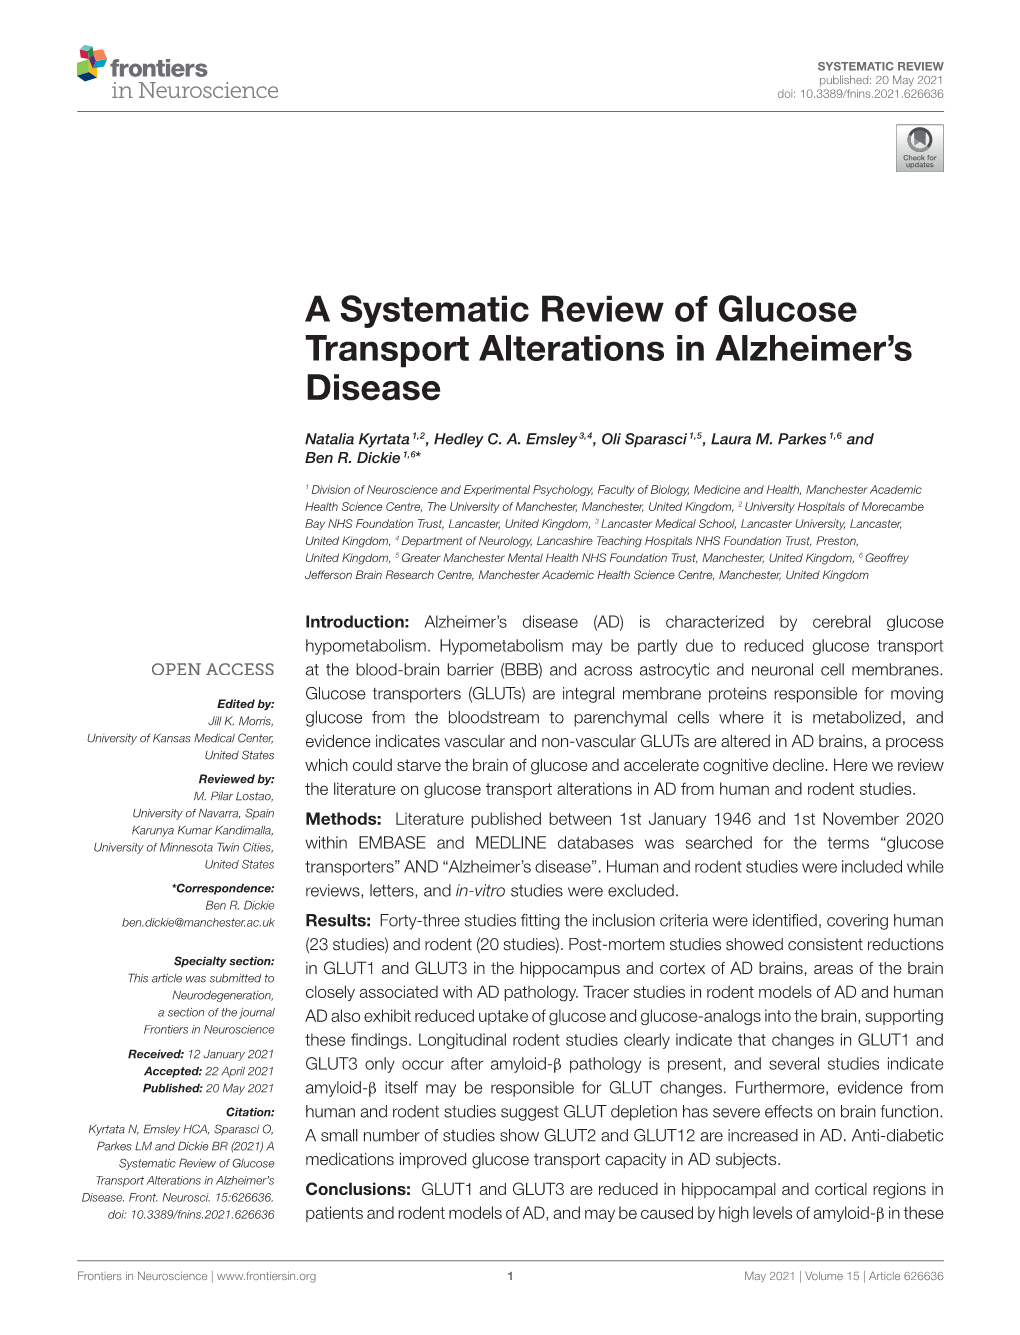 A Systematic Review of Glucose Transport Alterations in Alzheimer's